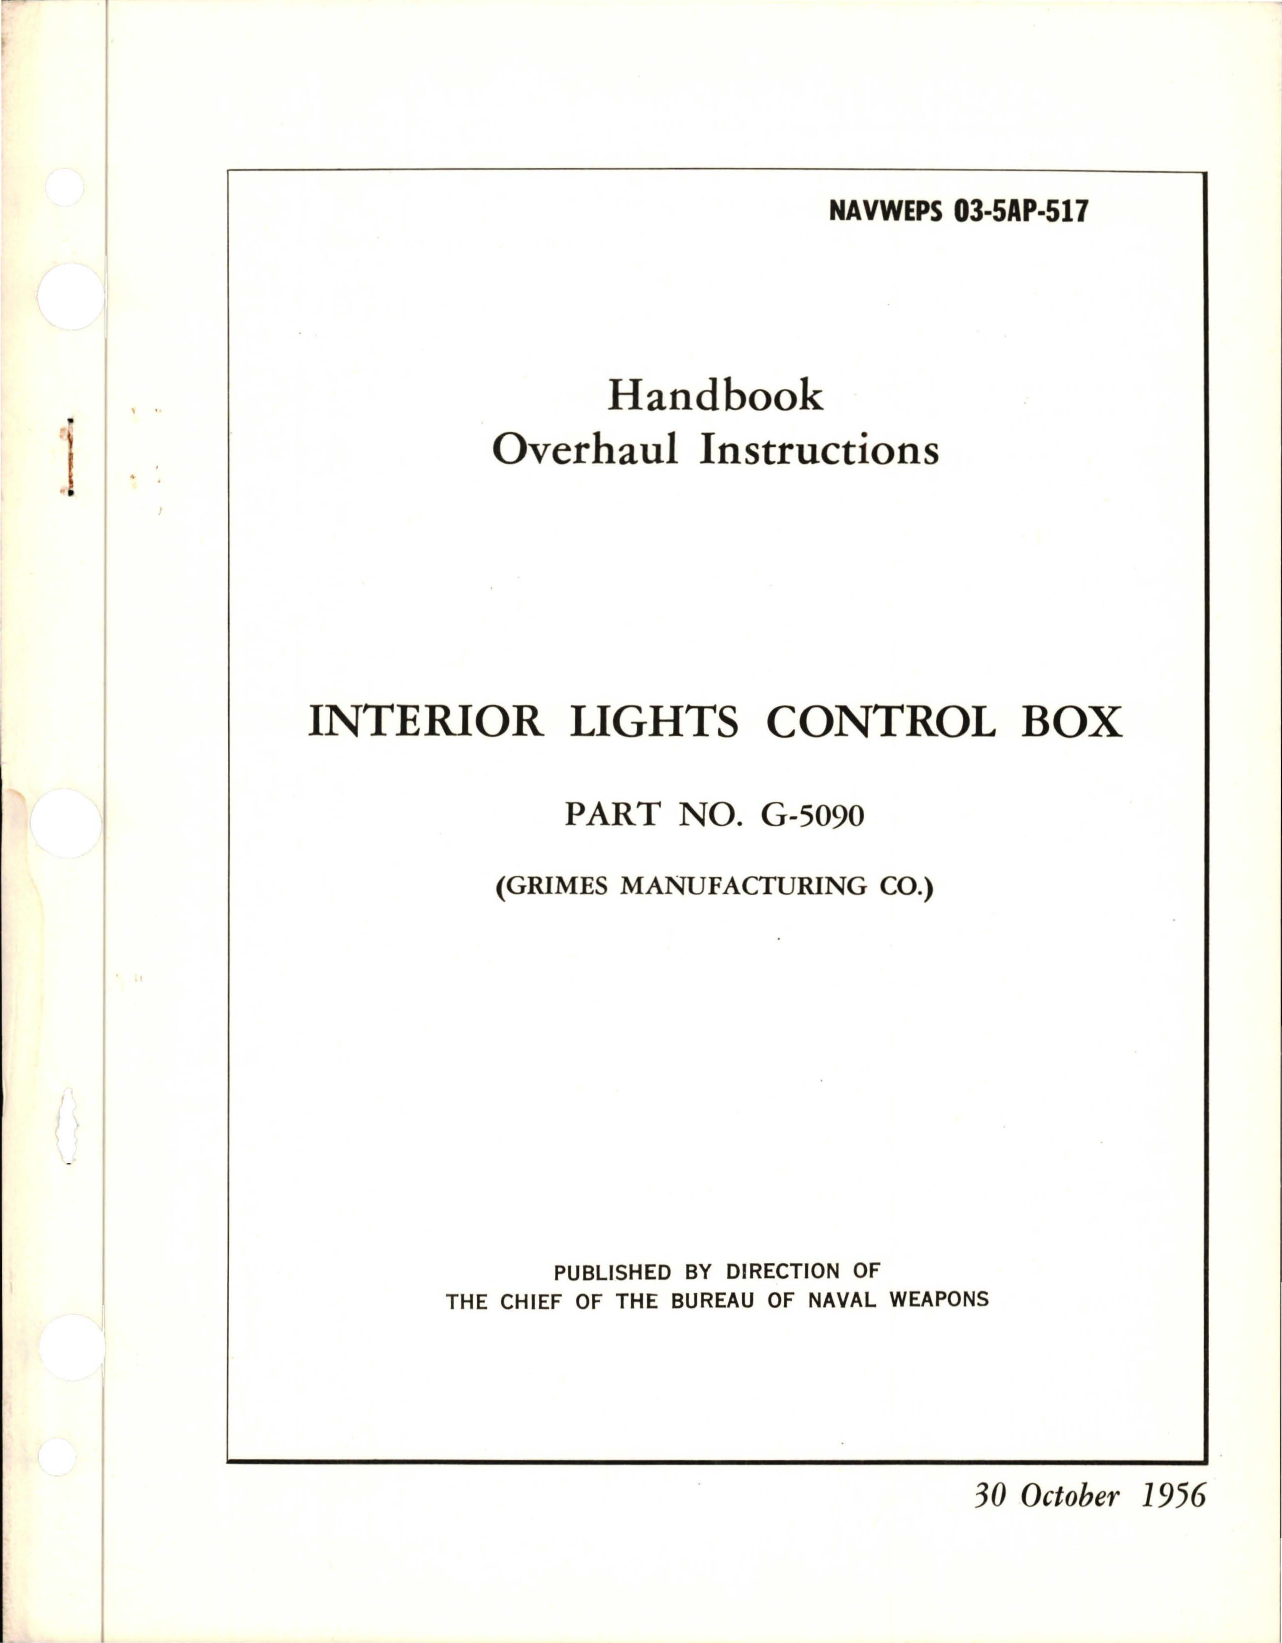 Sample page 1 from AirCorps Library document: Overhaul Instructions for Interior Lights Control Box - Part G-5090